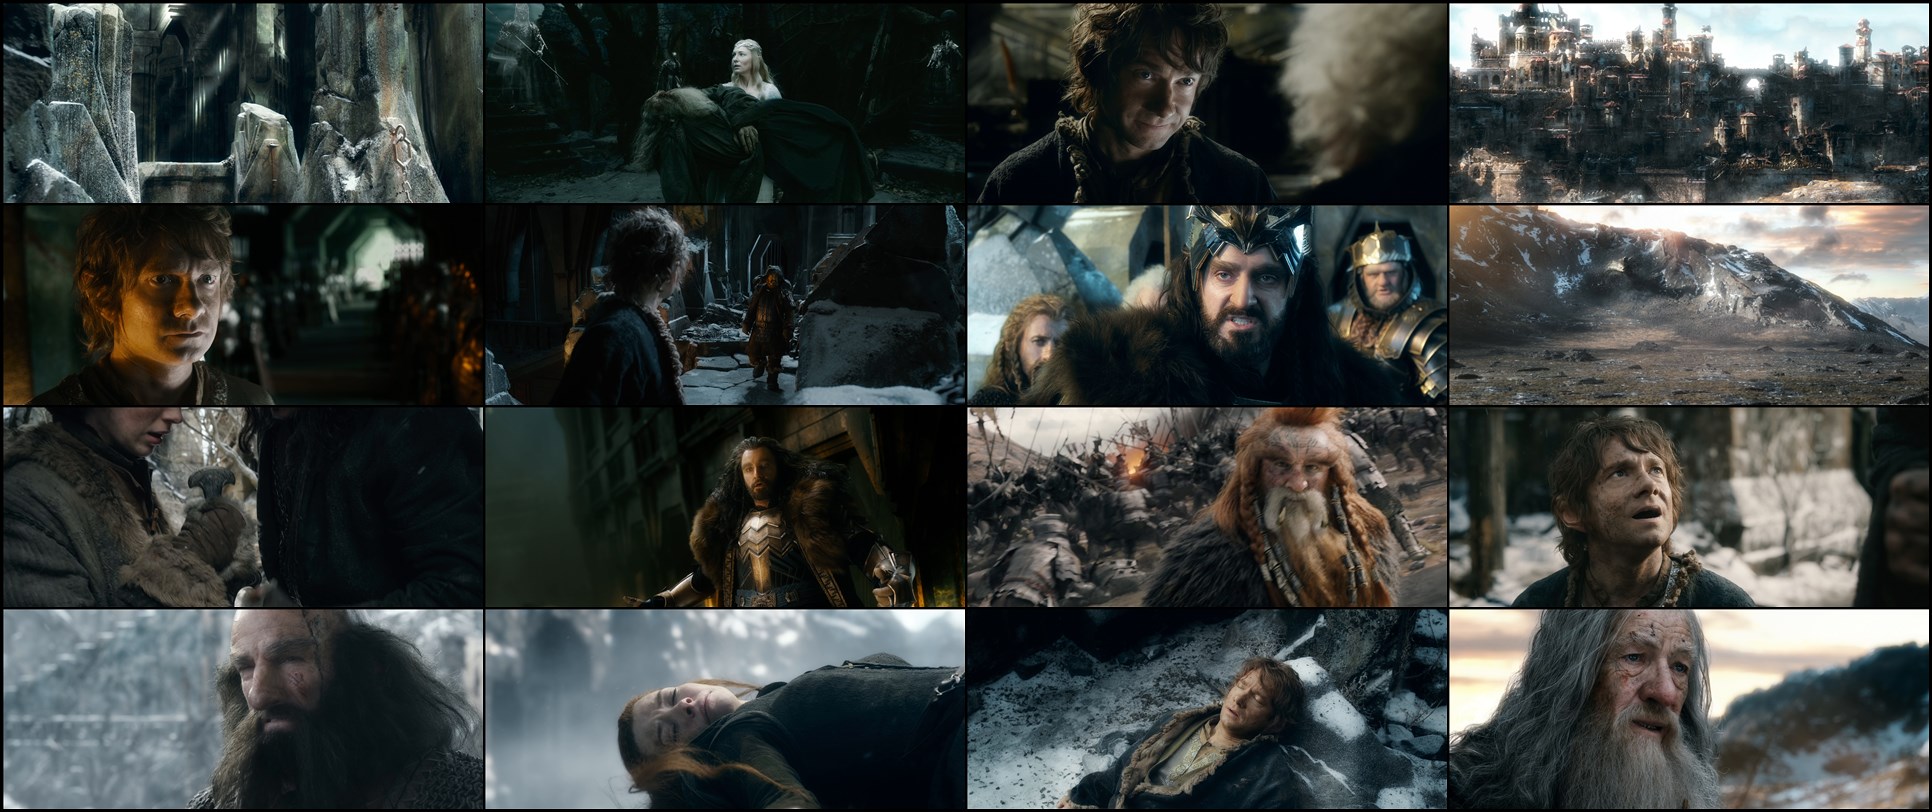 Loading Screenshot for The Hobbit: The Battle of the Five Armies (2014)